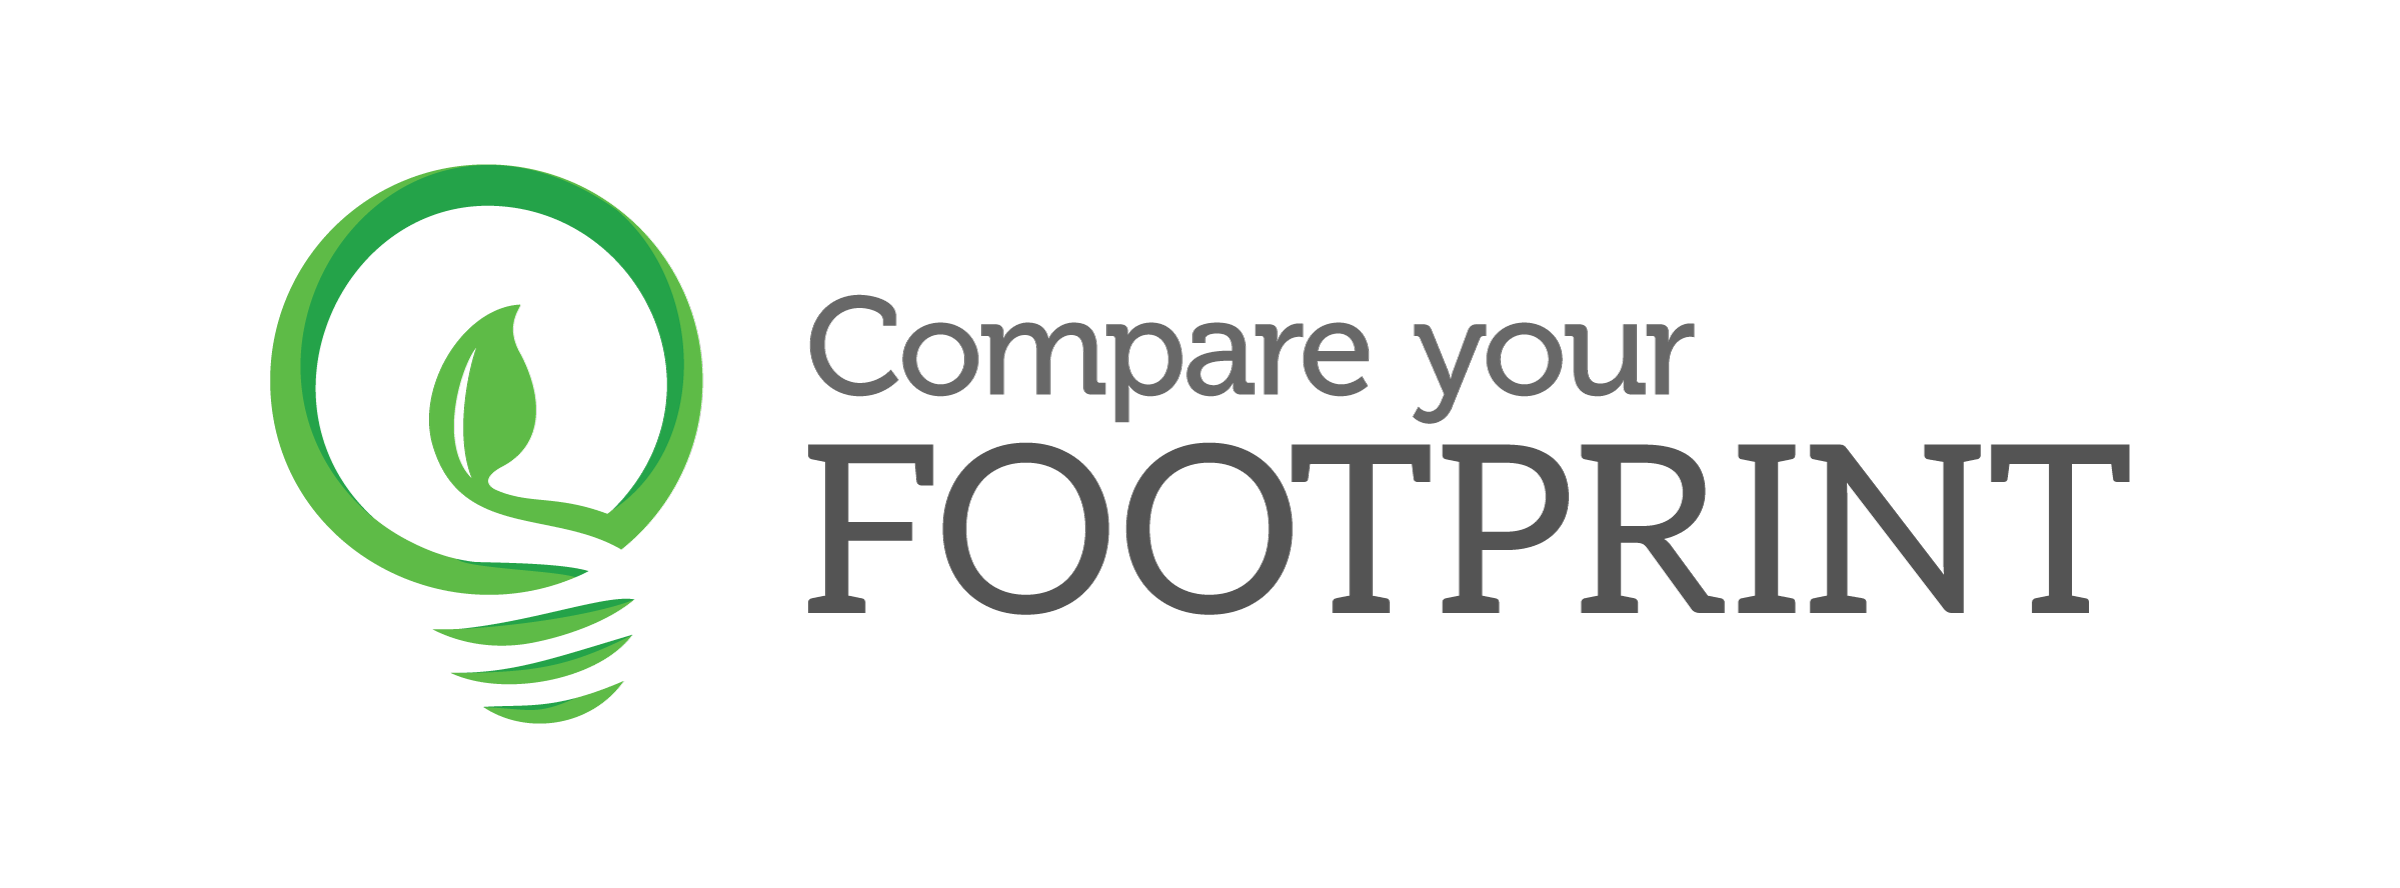 Compare Your Footprint testimonial